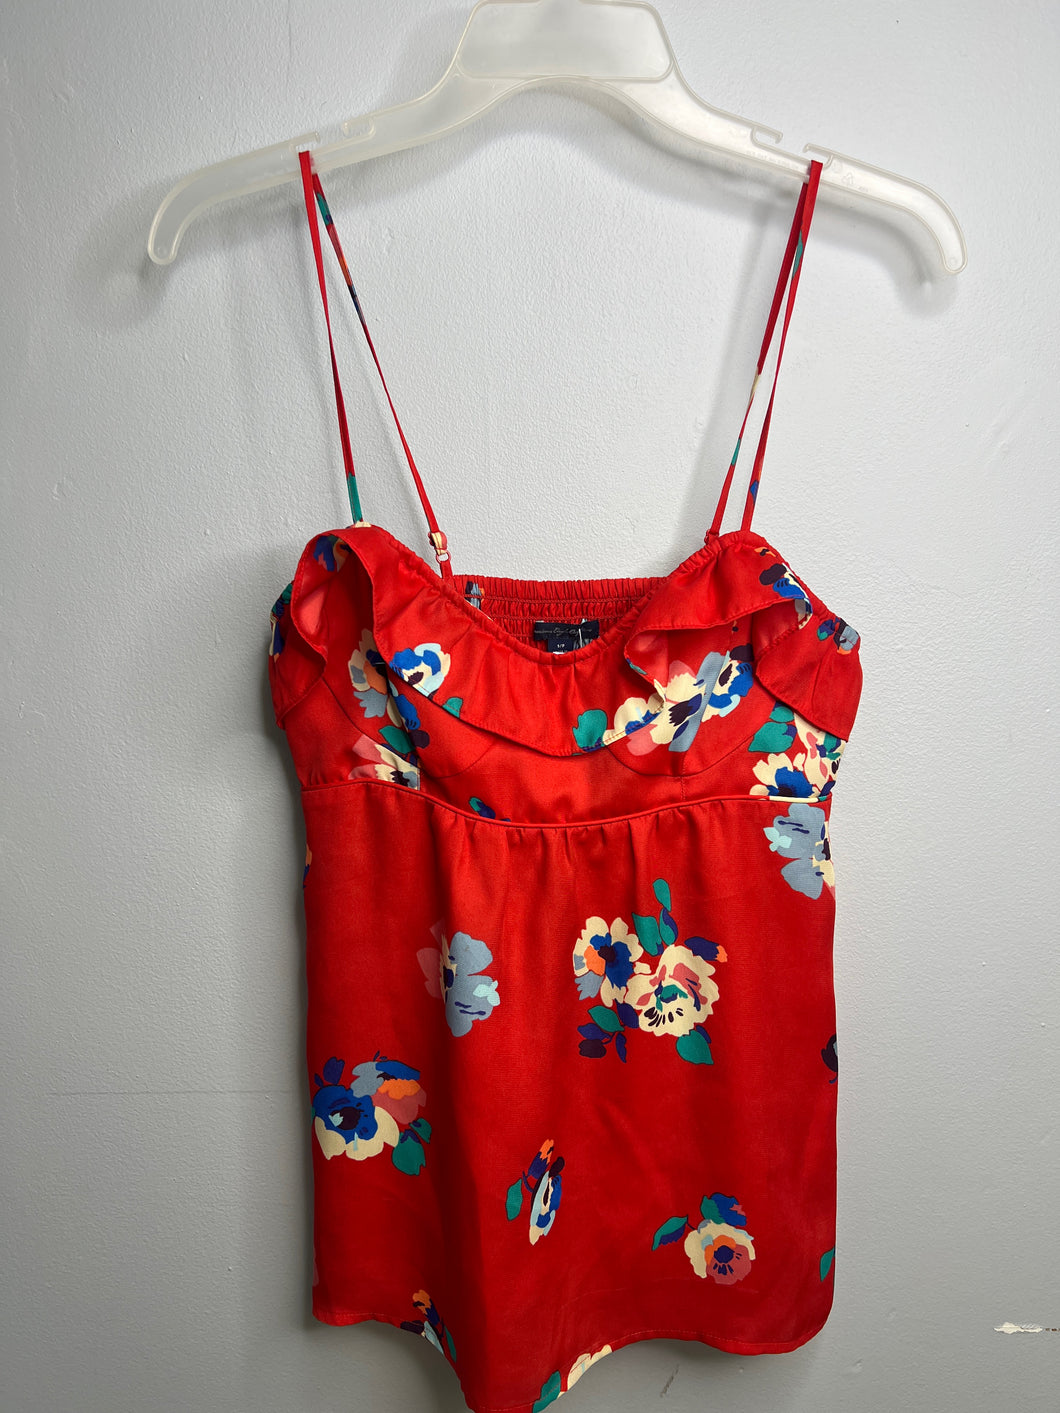 Womens Size S American Eagle red floral spaghetti strap Shirt